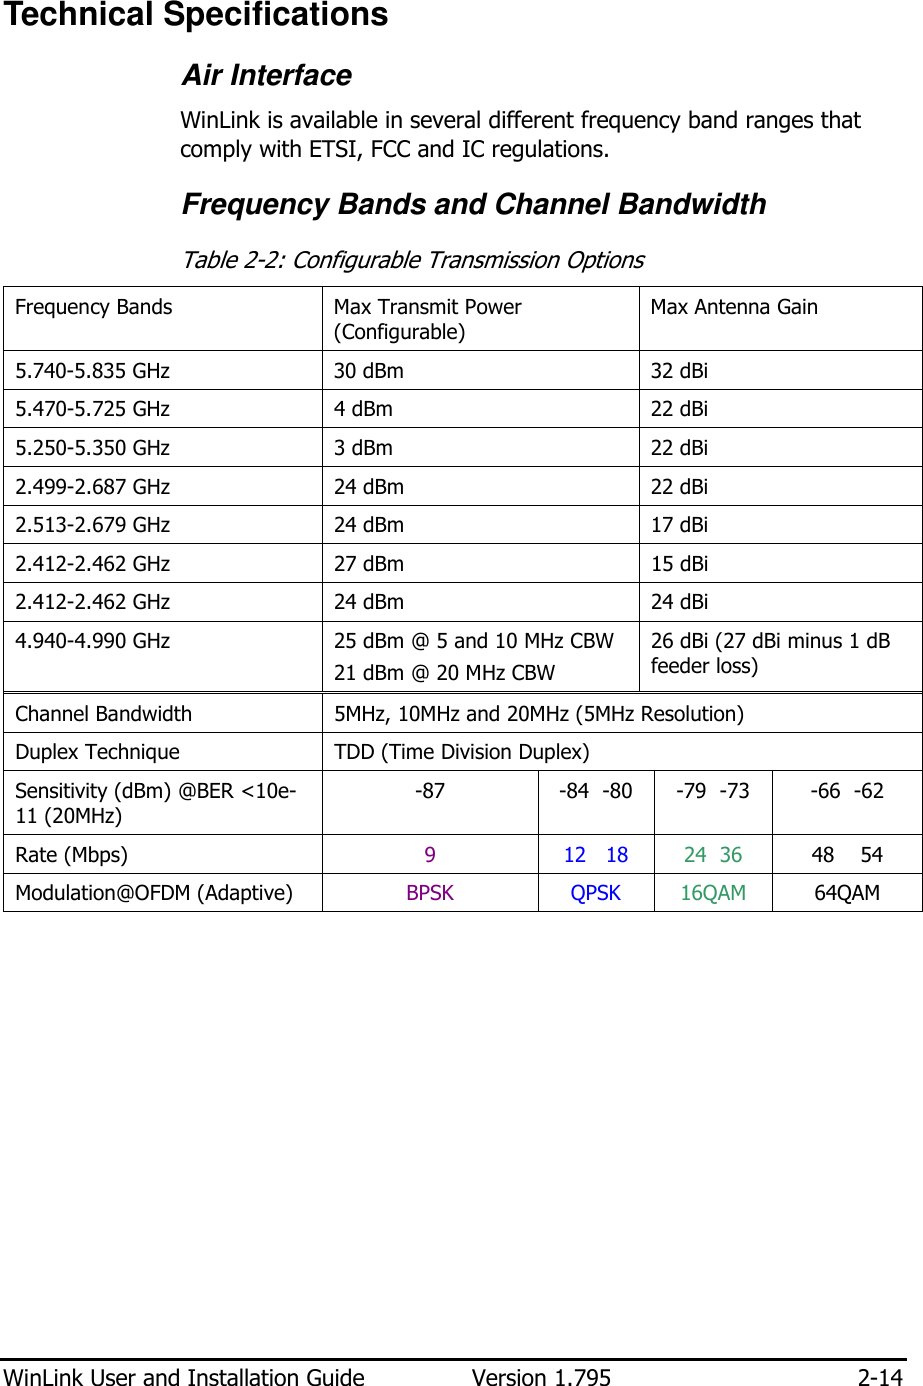  WinLink User and Installation Guide  Version 1.795  2-14  Technical Specifications Air Interface  WinLink is available in several different frequency band ranges that comply with ETSI, FCC and IC regulations. Frequency Bands and Channel Bandwidth Table  2-2: Configurable Transmission Options Frequency Bands  Max Transmit Power (Configurable) Max Antenna Gain 5.740-5.835 GHz   30 dBm  32 dBi 5.470-5.725 GHz   4 dBm  22 dBi 5.250-5.350 GHz   3 dBm  22 dBi 2.499-2.687 GHz   24 dBm  22 dBi 2.513-2.679 GHz  24 dBm  17 dBi 2.412-2.462 GHz   27 dBm  15 dBi 2.412-2.462 GHz   24 dBm  24 dBi 4.940-4.990 GHz  25 dBm @ 5 and 10 MHz CBW 21 dBm @ 20 MHz CBW 26 dBi (27 dBi minus 1 dB feeder loss) Channel Bandwidth  5MHz, 10MHz and 20MHz (5MHz Resolution) Duplex Technique  TDD (Time Division Duplex) Sensitivity (dBm) @BER &lt;10e-11 (20MHz) -87 -84  -80 -79  -73 -66  -62 Rate (Mbps)  9 12   18 24  36  48    54 Modulation@OFDM (Adaptive)  BPSK  QPSK  16QAM  64QAM         